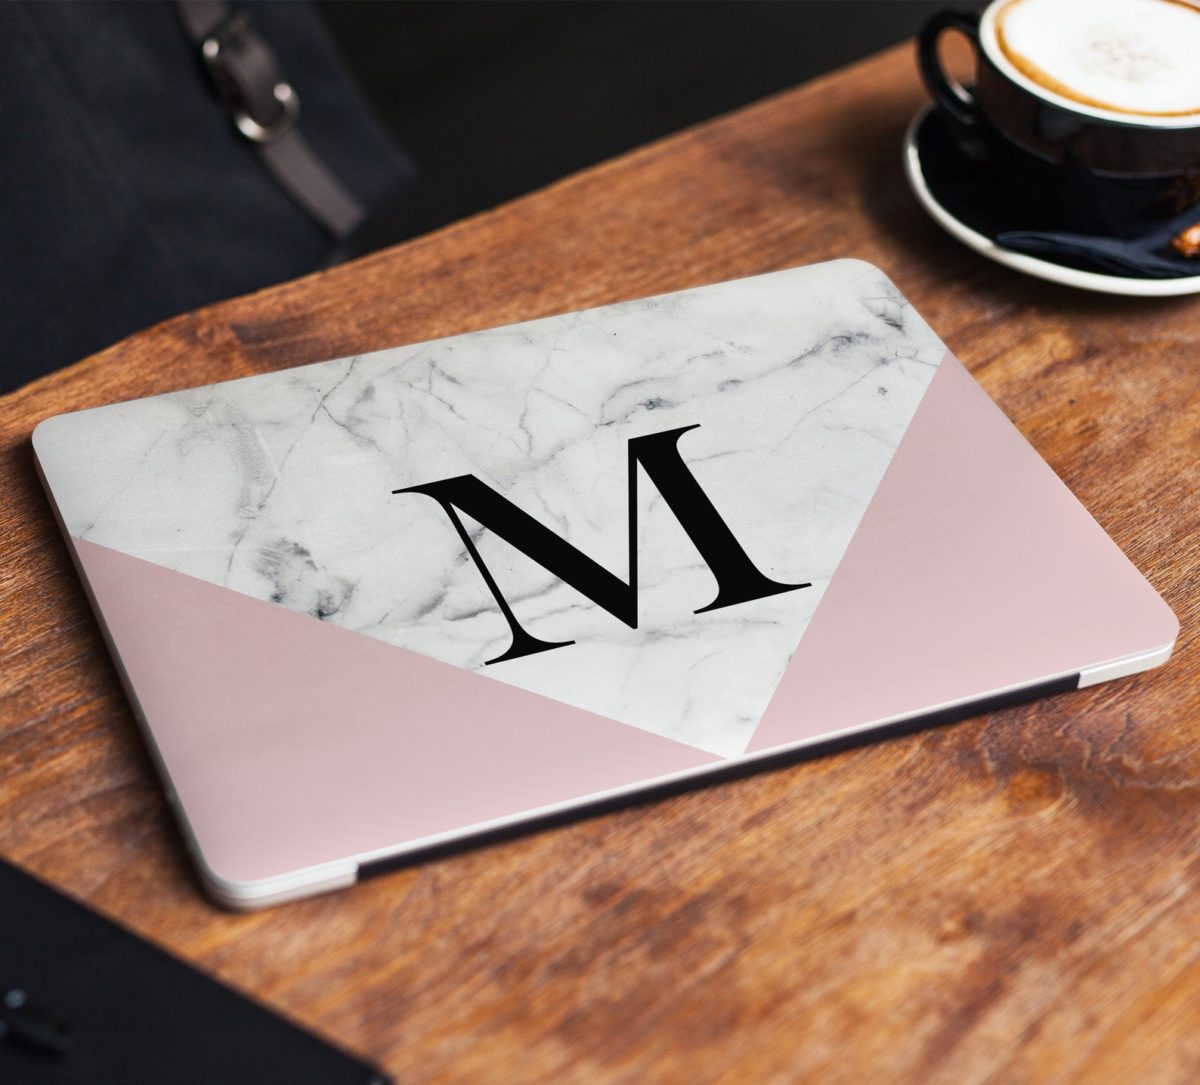 23 awesome laptop decals from etsy to make working a bit more fun | get creative with your workspace, specifically your laptop!